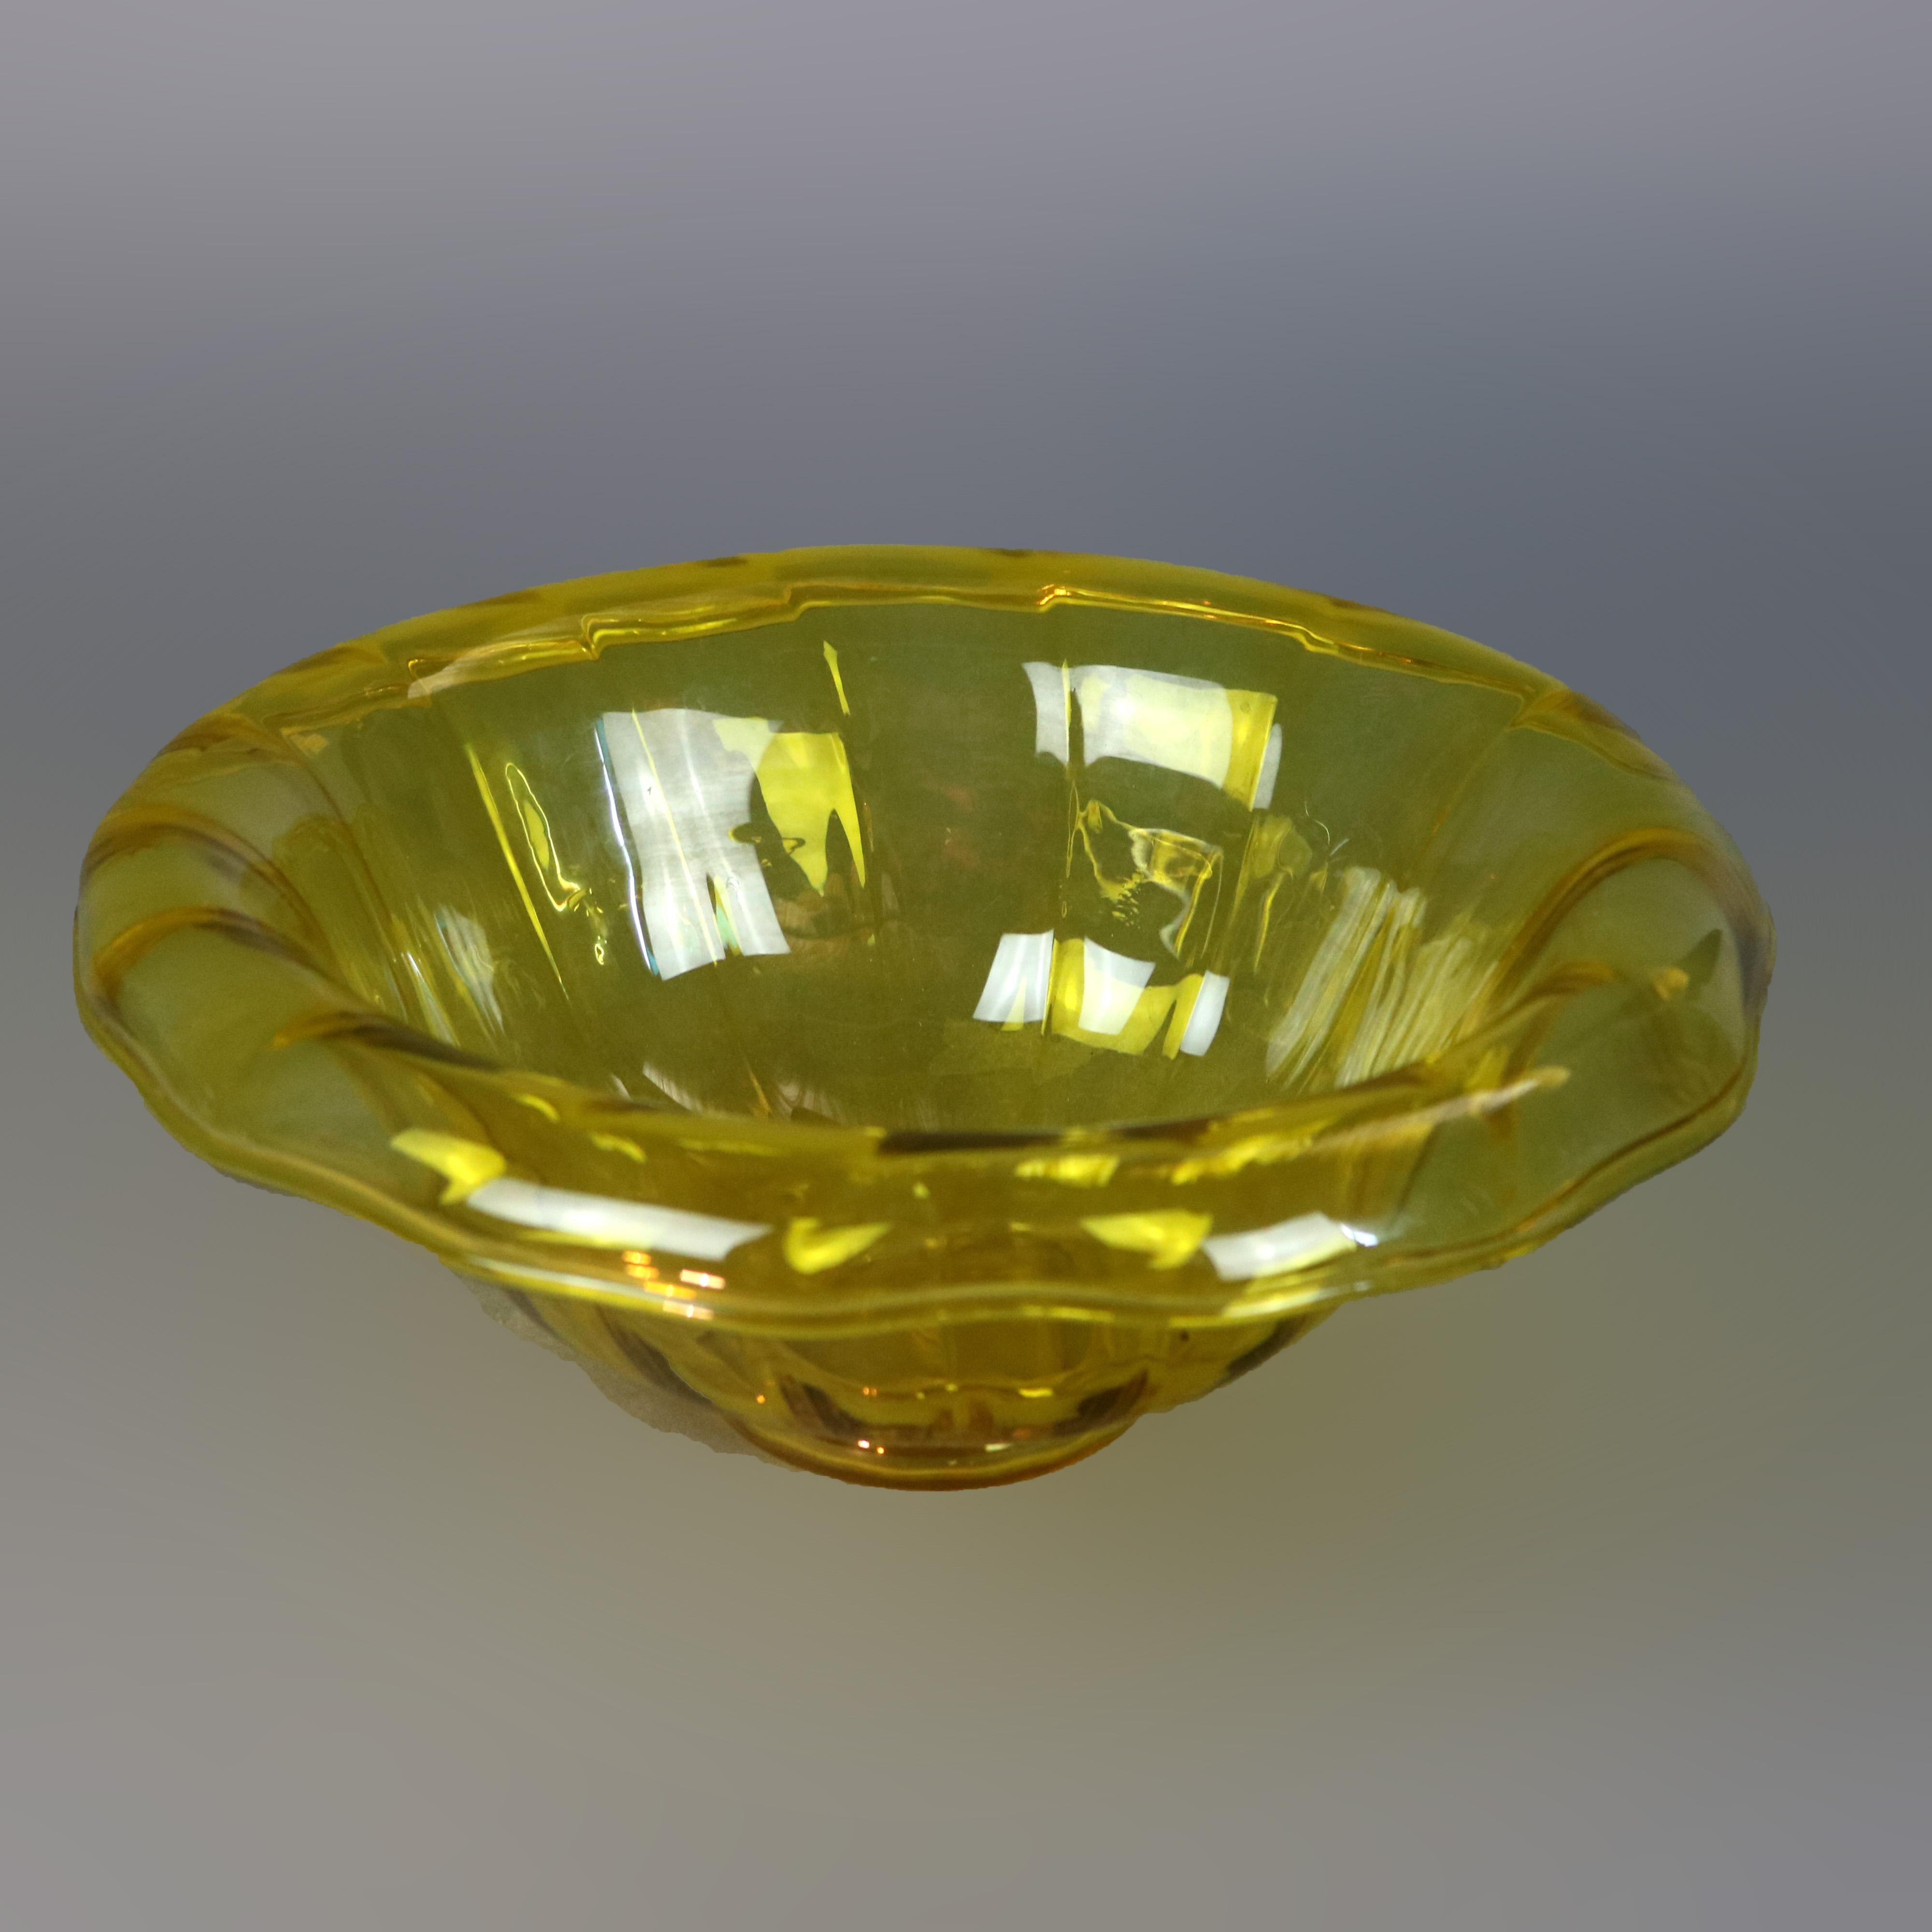 A vintage center bowl by Steuben offers amber art glass construction with paneled bowl and wide scrolled rim, unsigned, 20th century.

Measures: 4.5